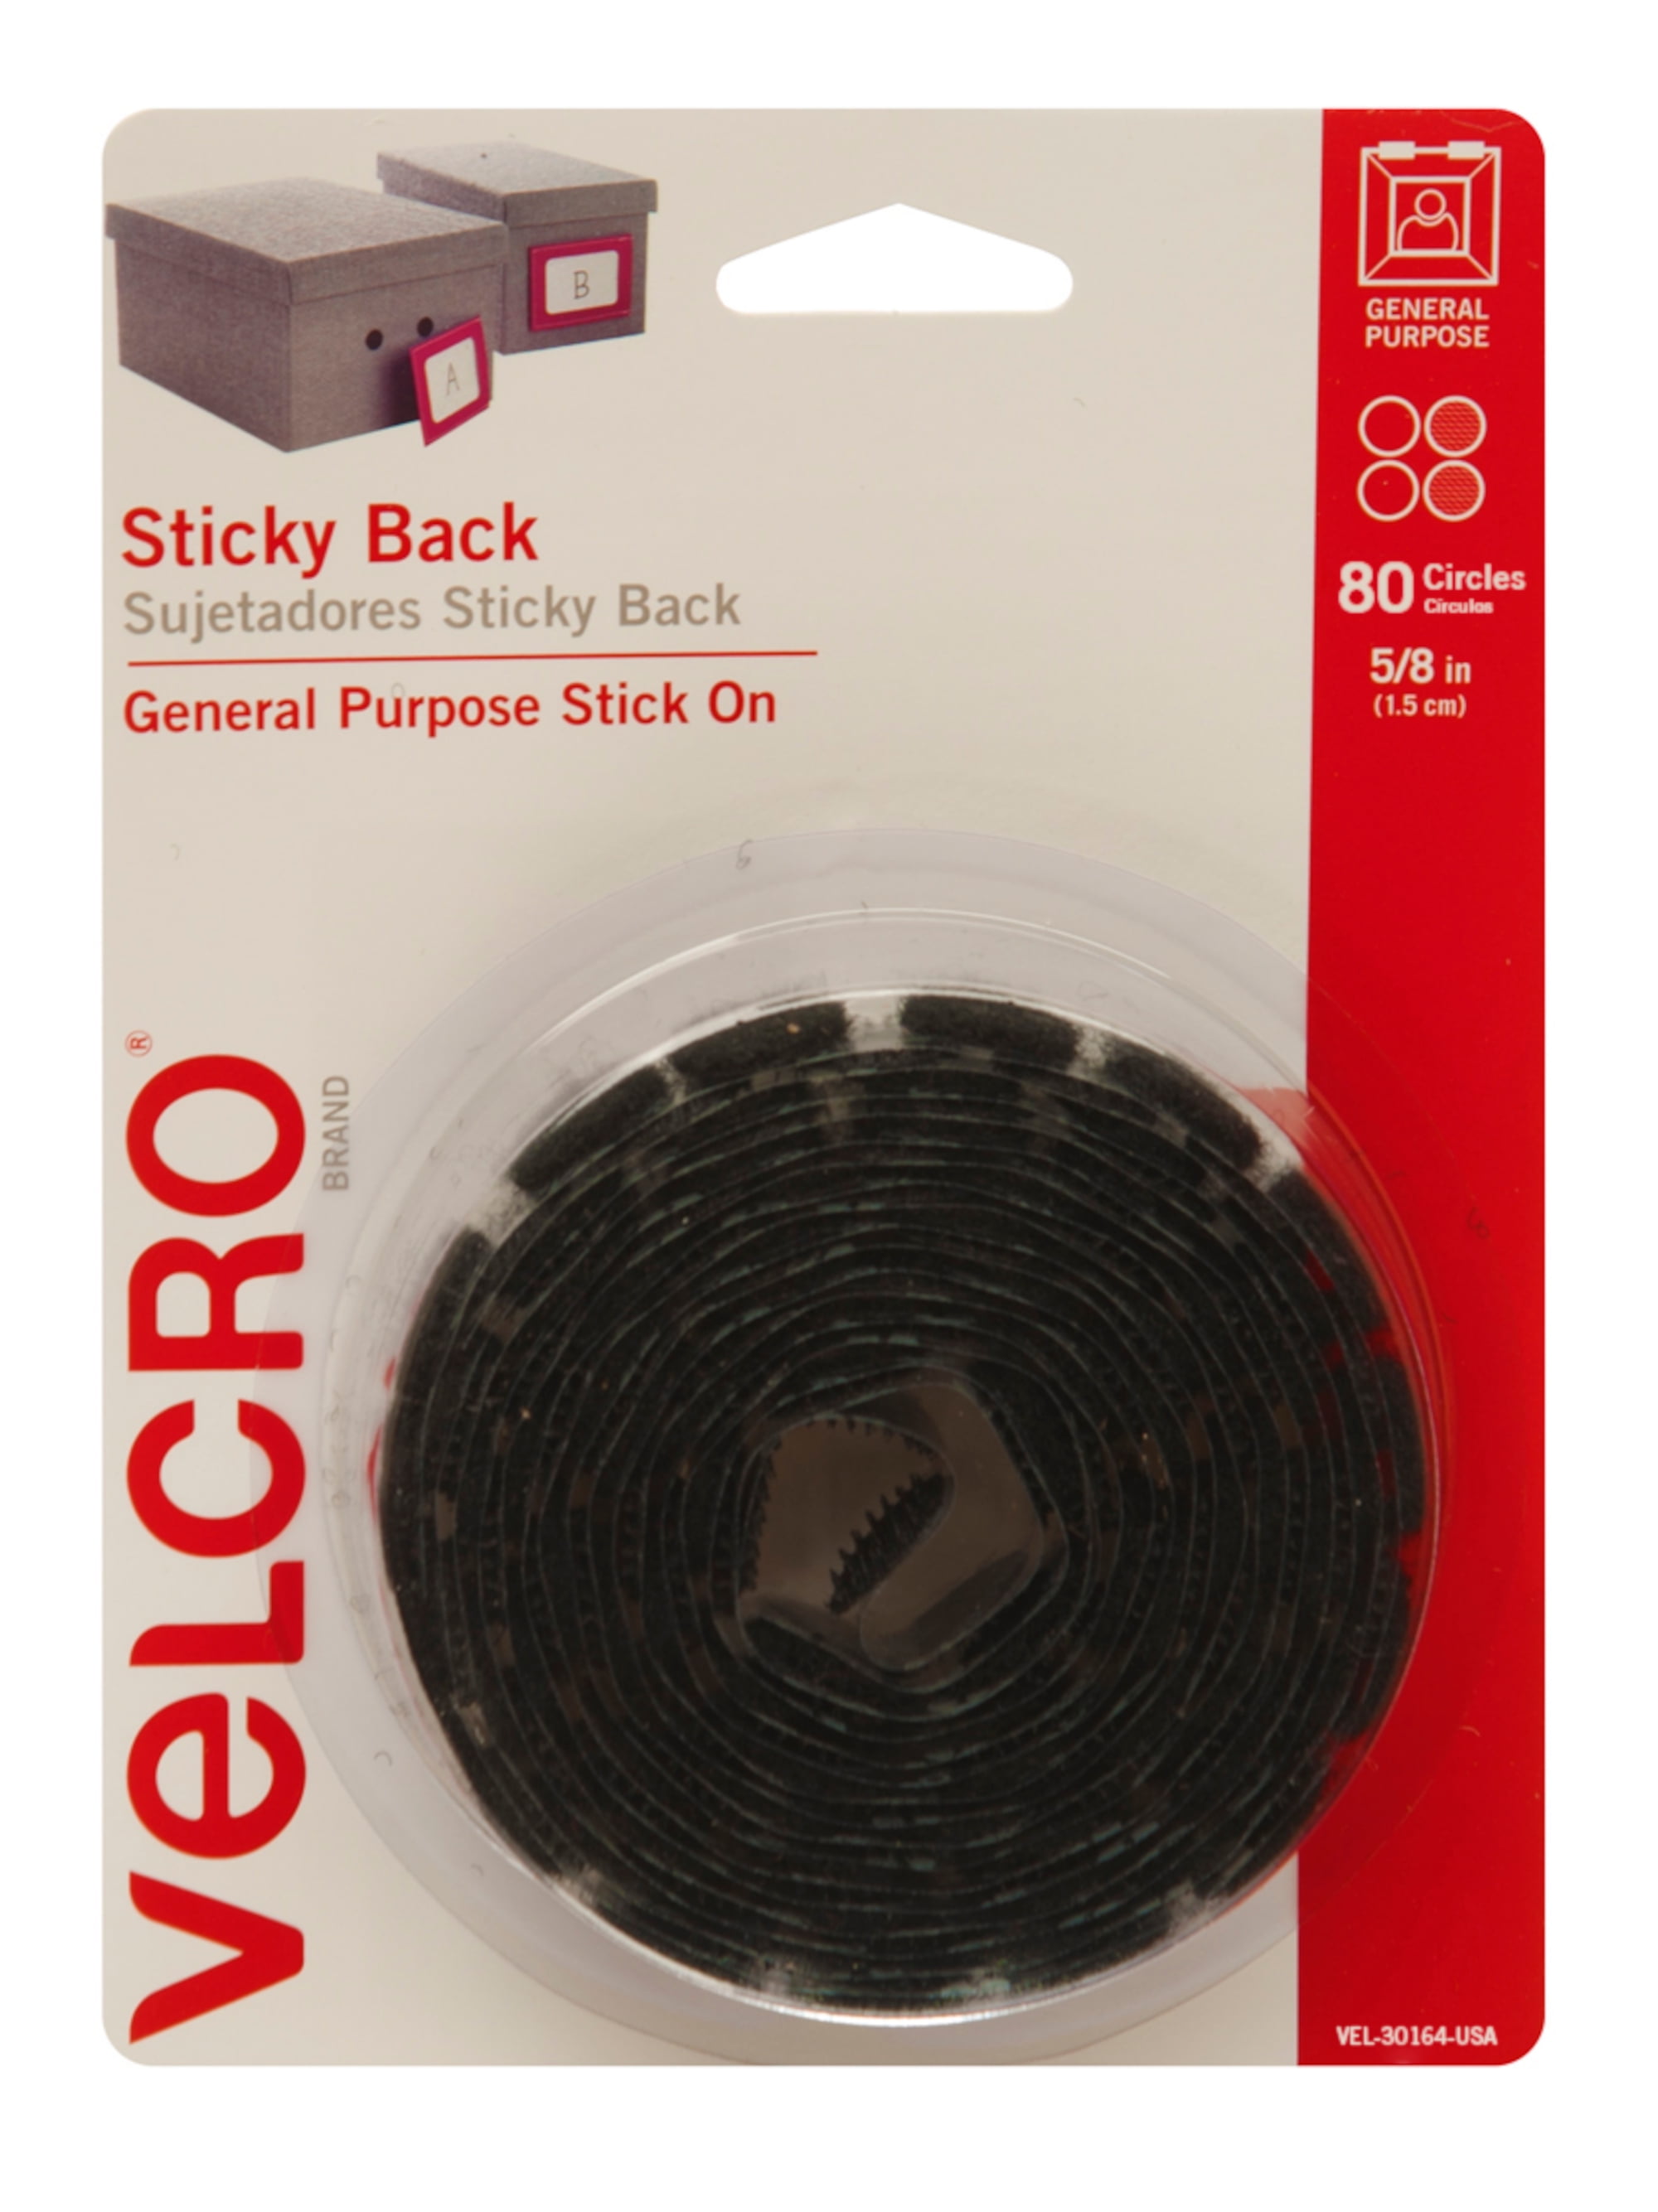 20 Sets 2x4 Inch Hook and Loop Strips with Adhesive, Industrial Strength  Sticky Back Fastener, Double Sided Heavy Duty Hook and Loop Tape for